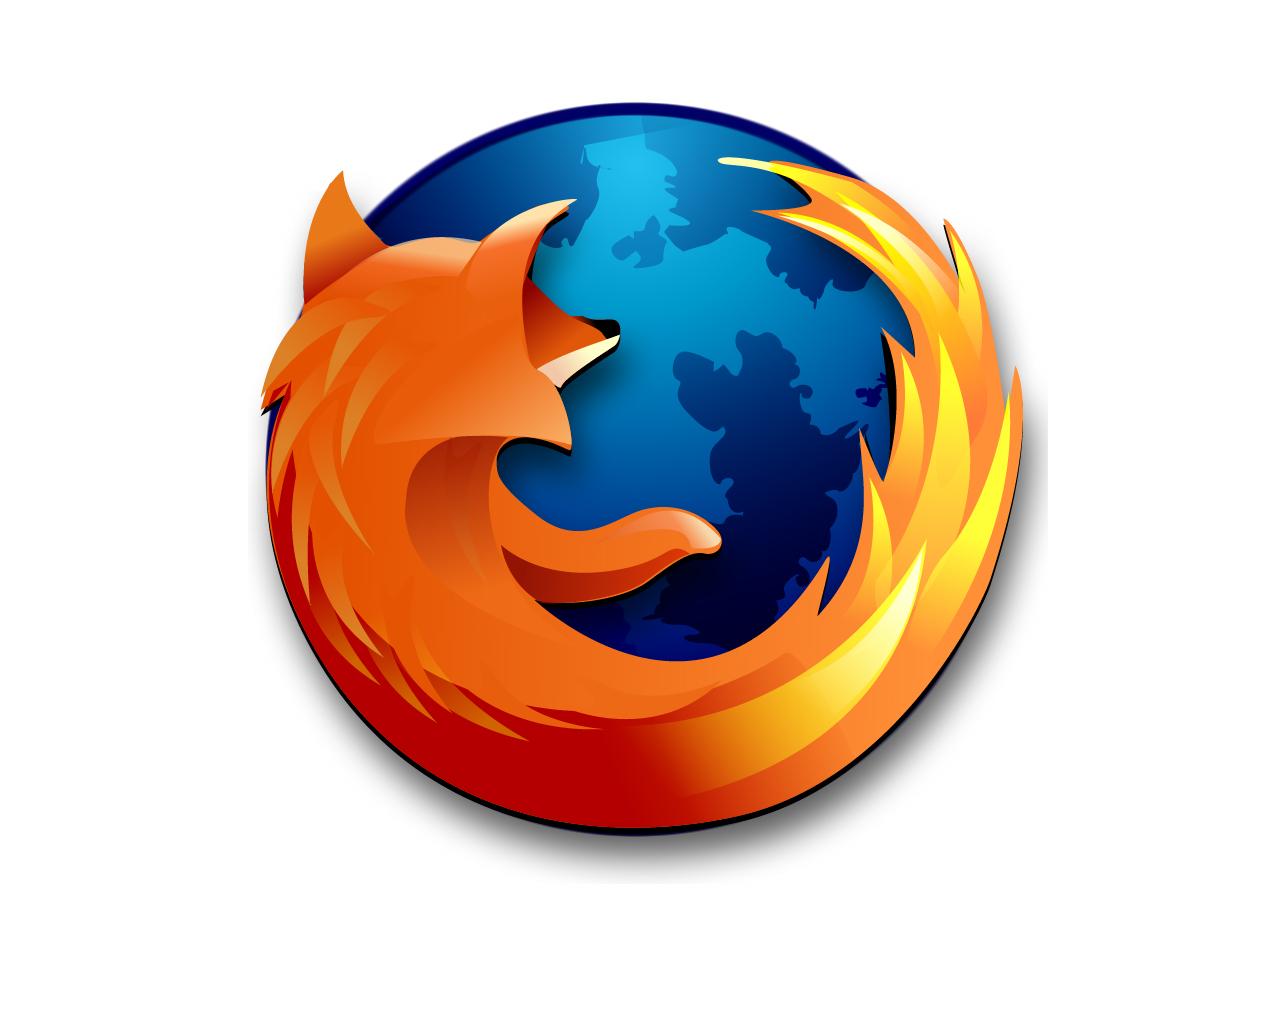 where can i find older versions of firefox